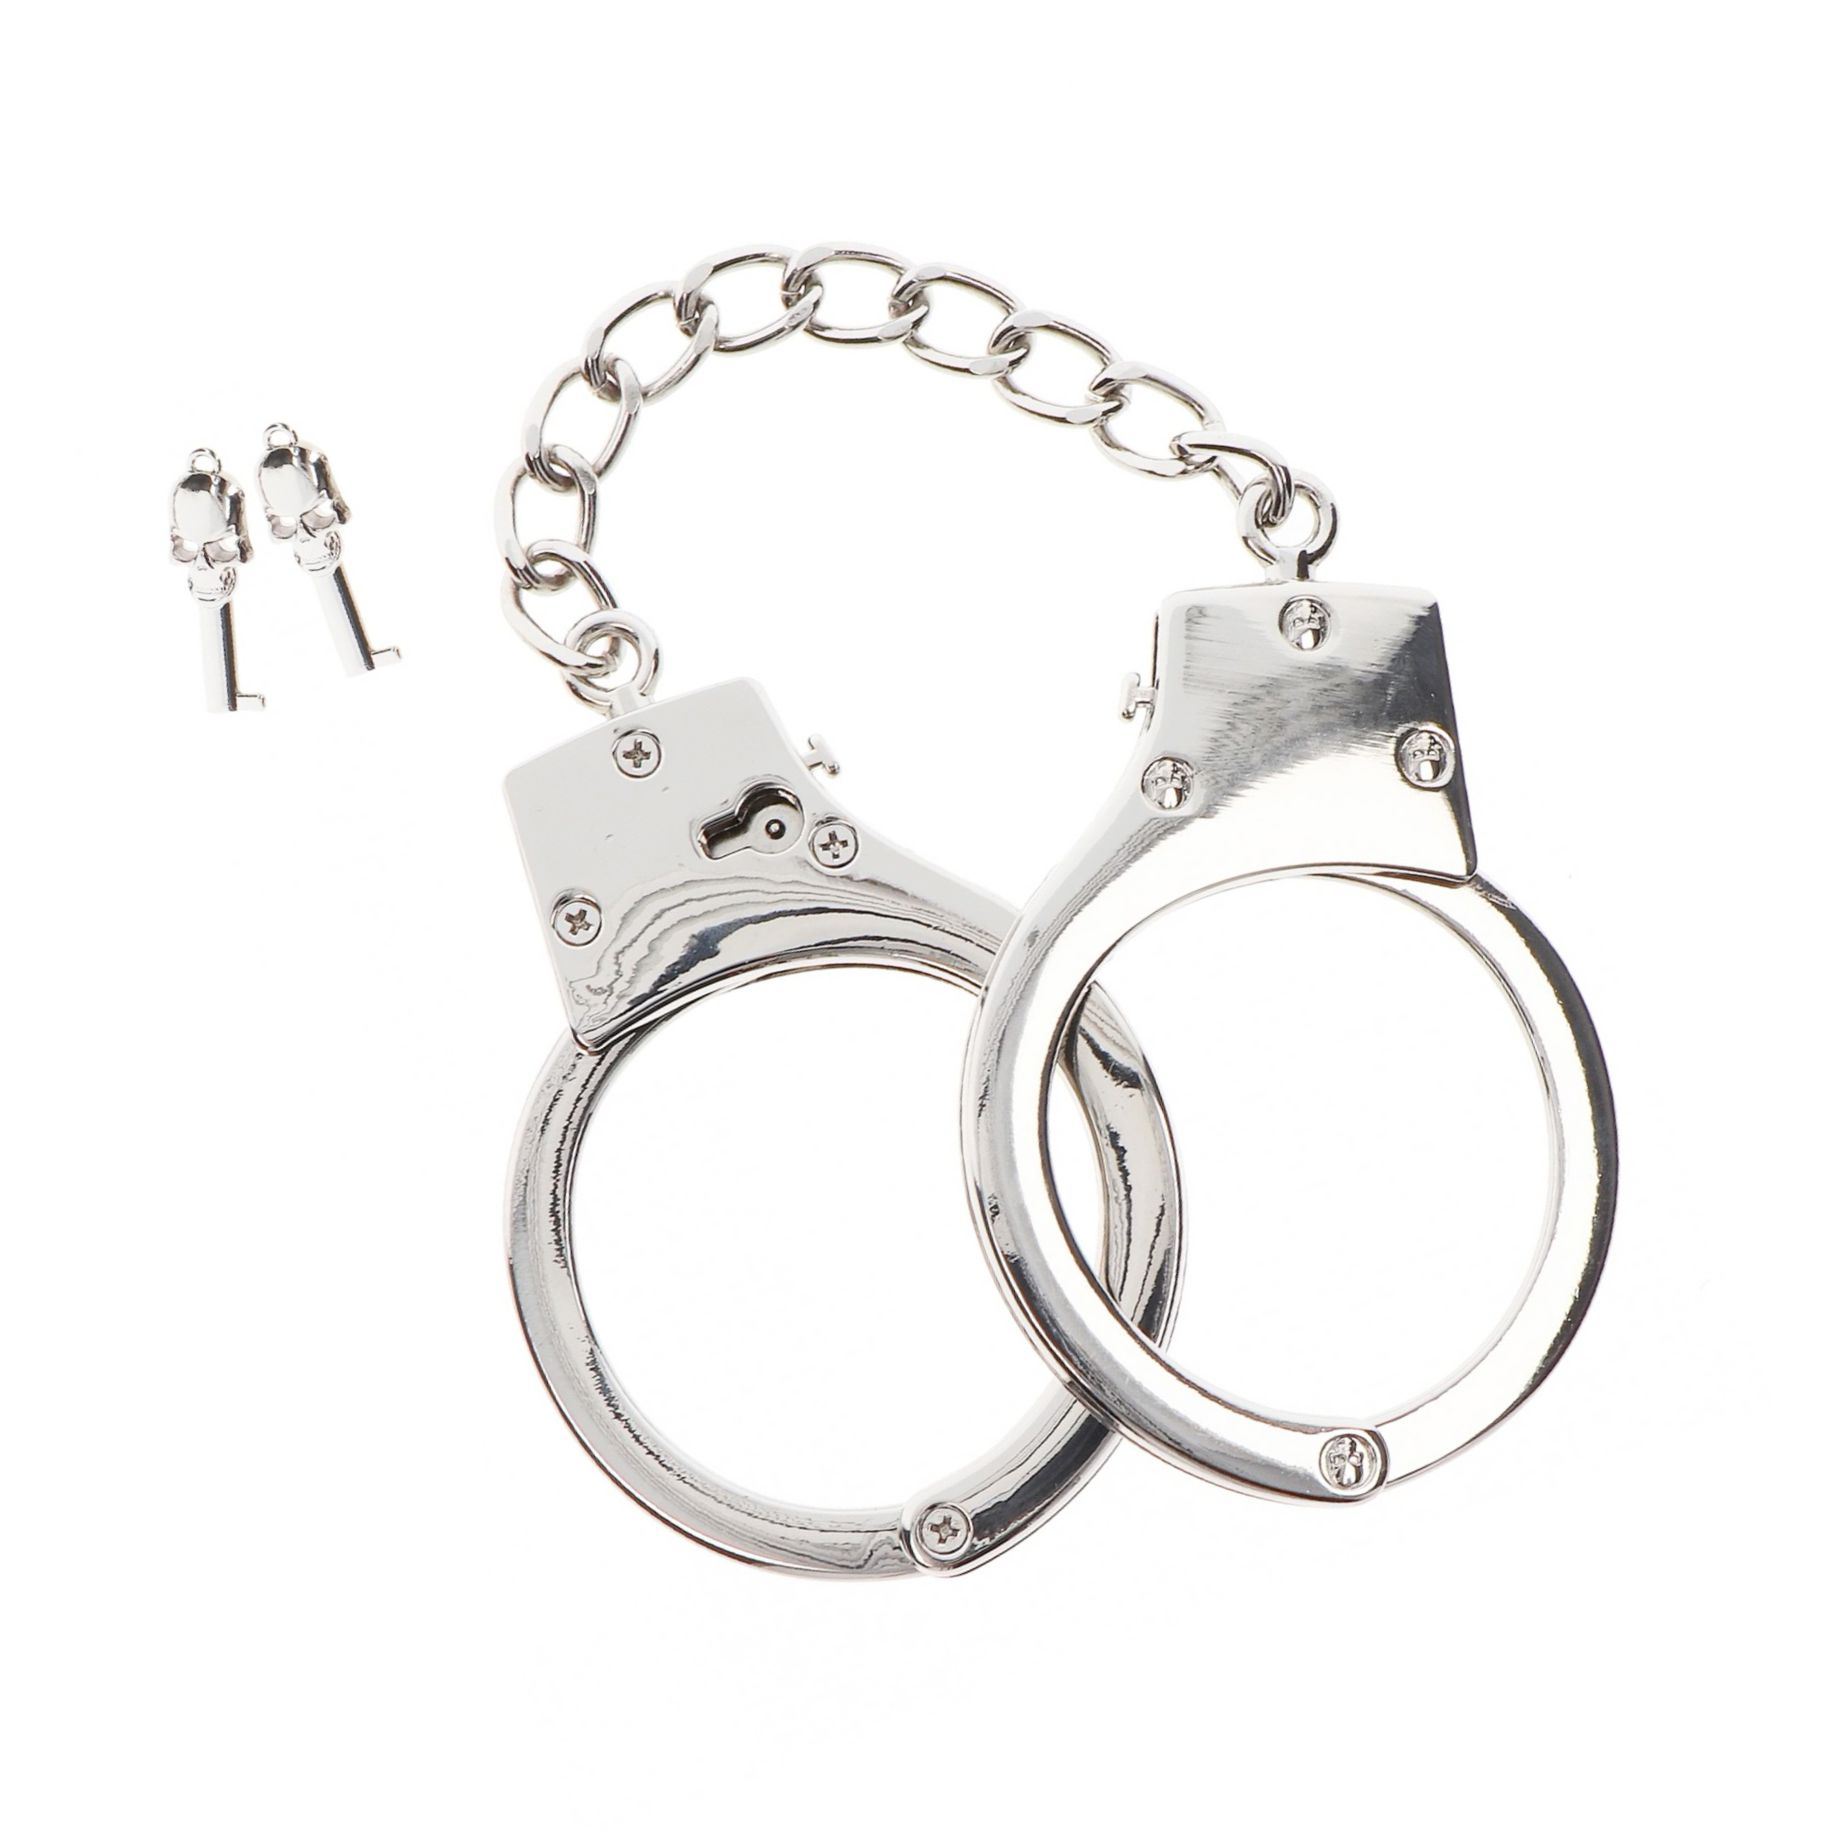 Catuse Silver Plated BDSM